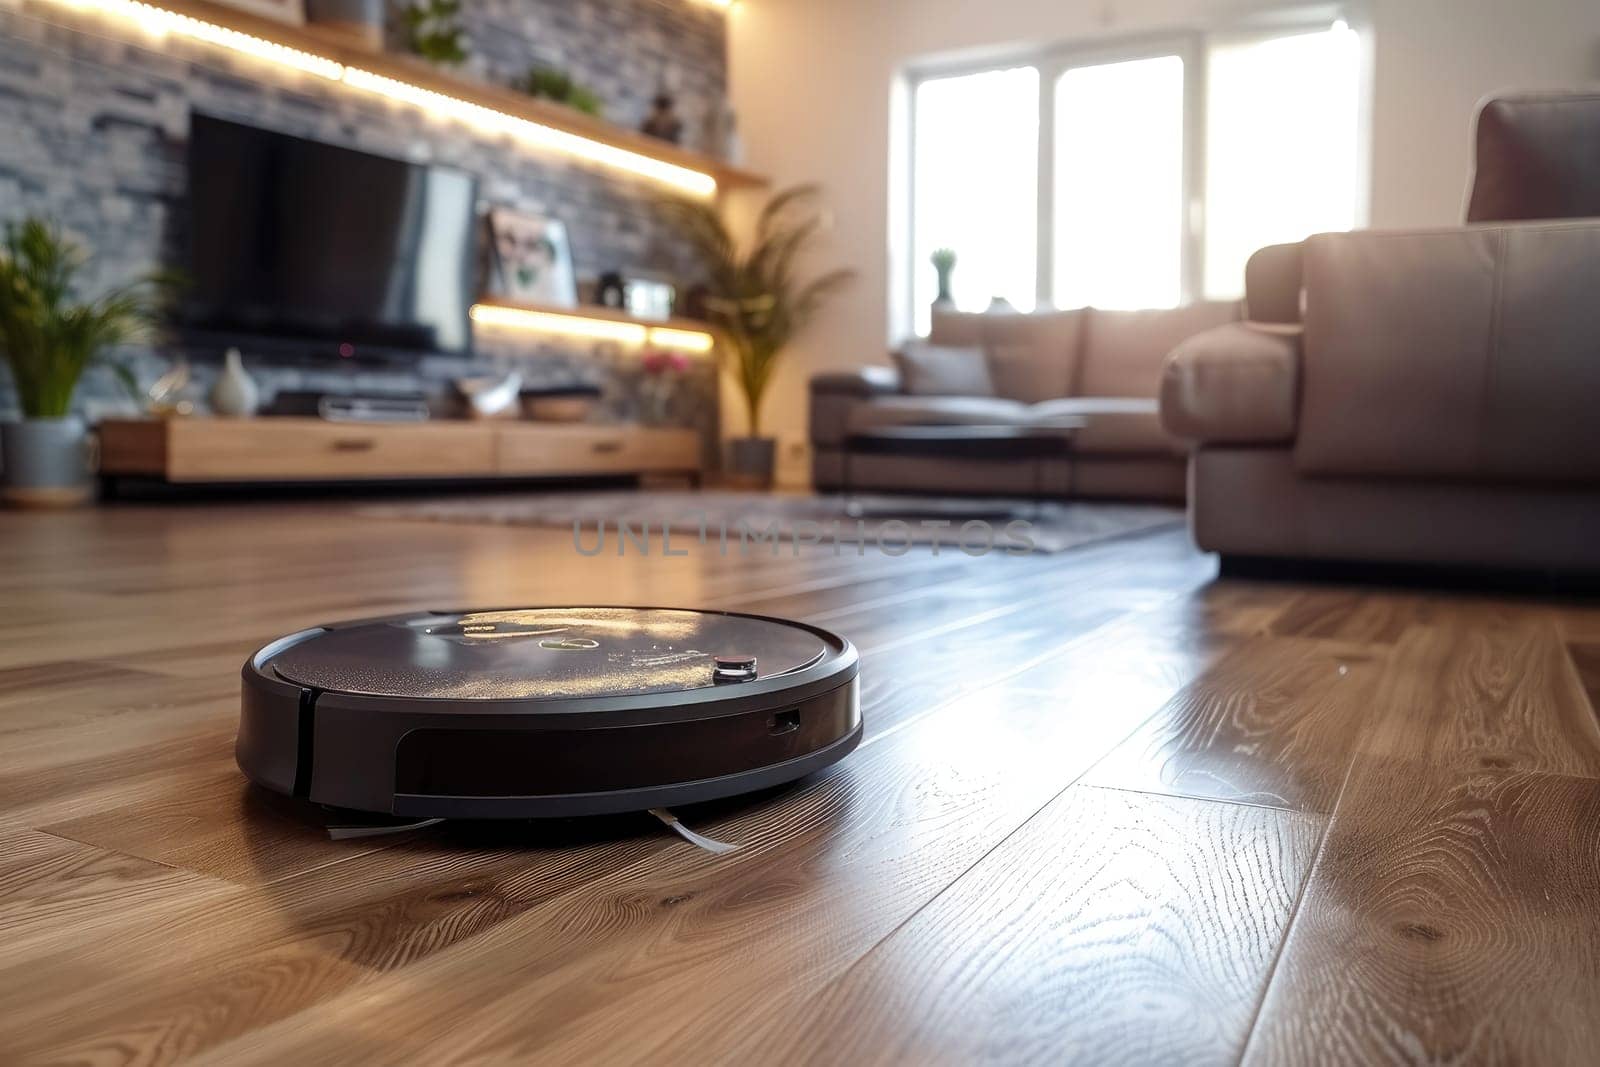 A robot vacuum cleaner navigates a clean living room floor. by Chawagen